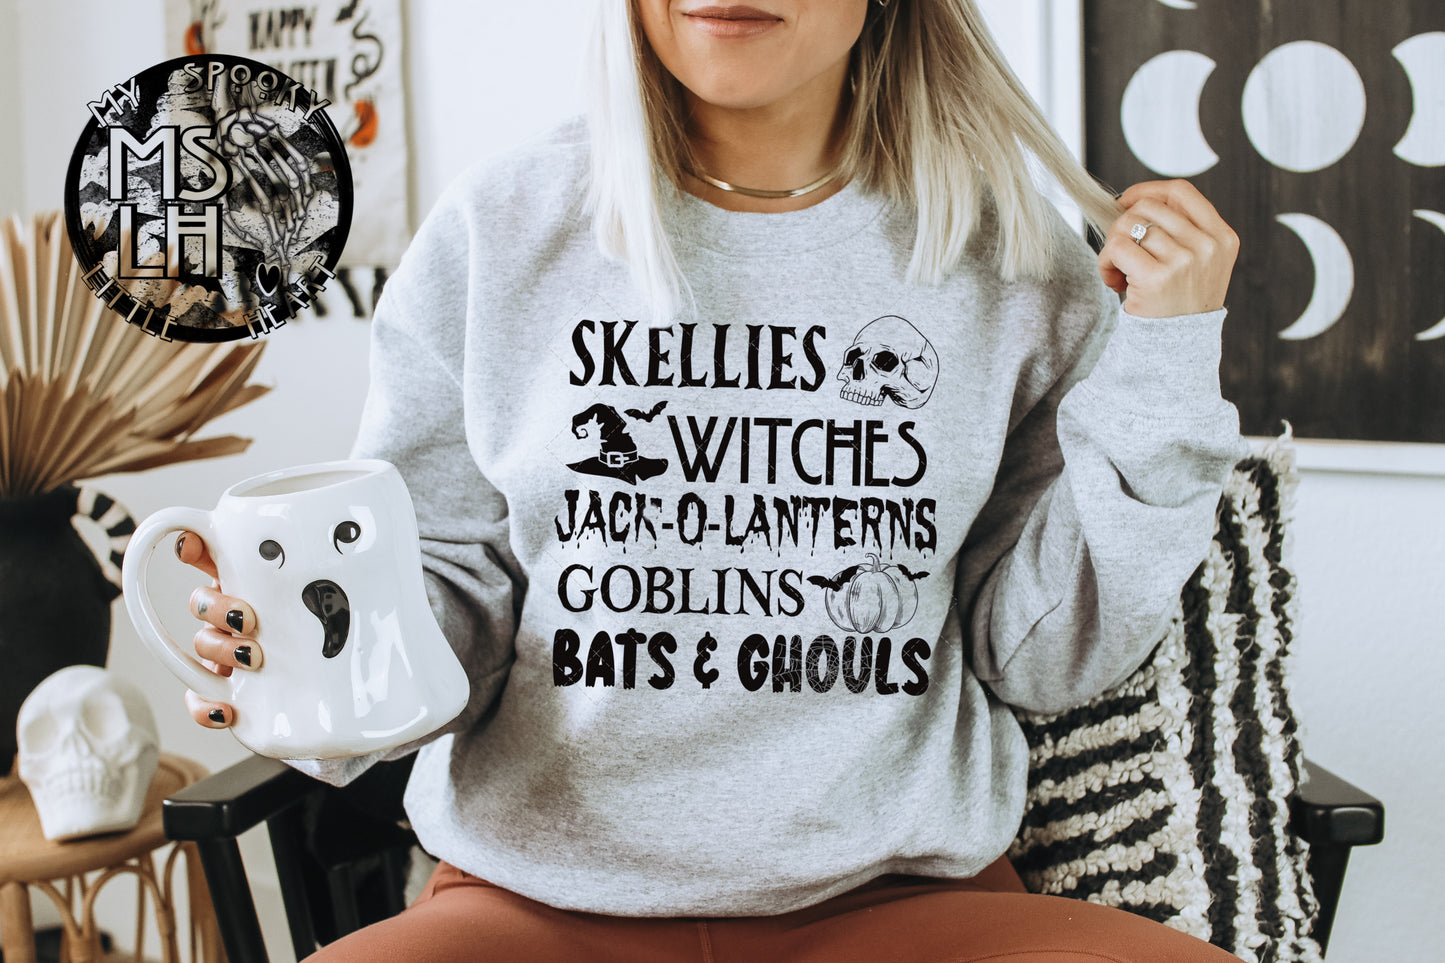 Halloween- Skellies, Witches, Jack-o-Lanterns, Goblins, Bats & Ghouls